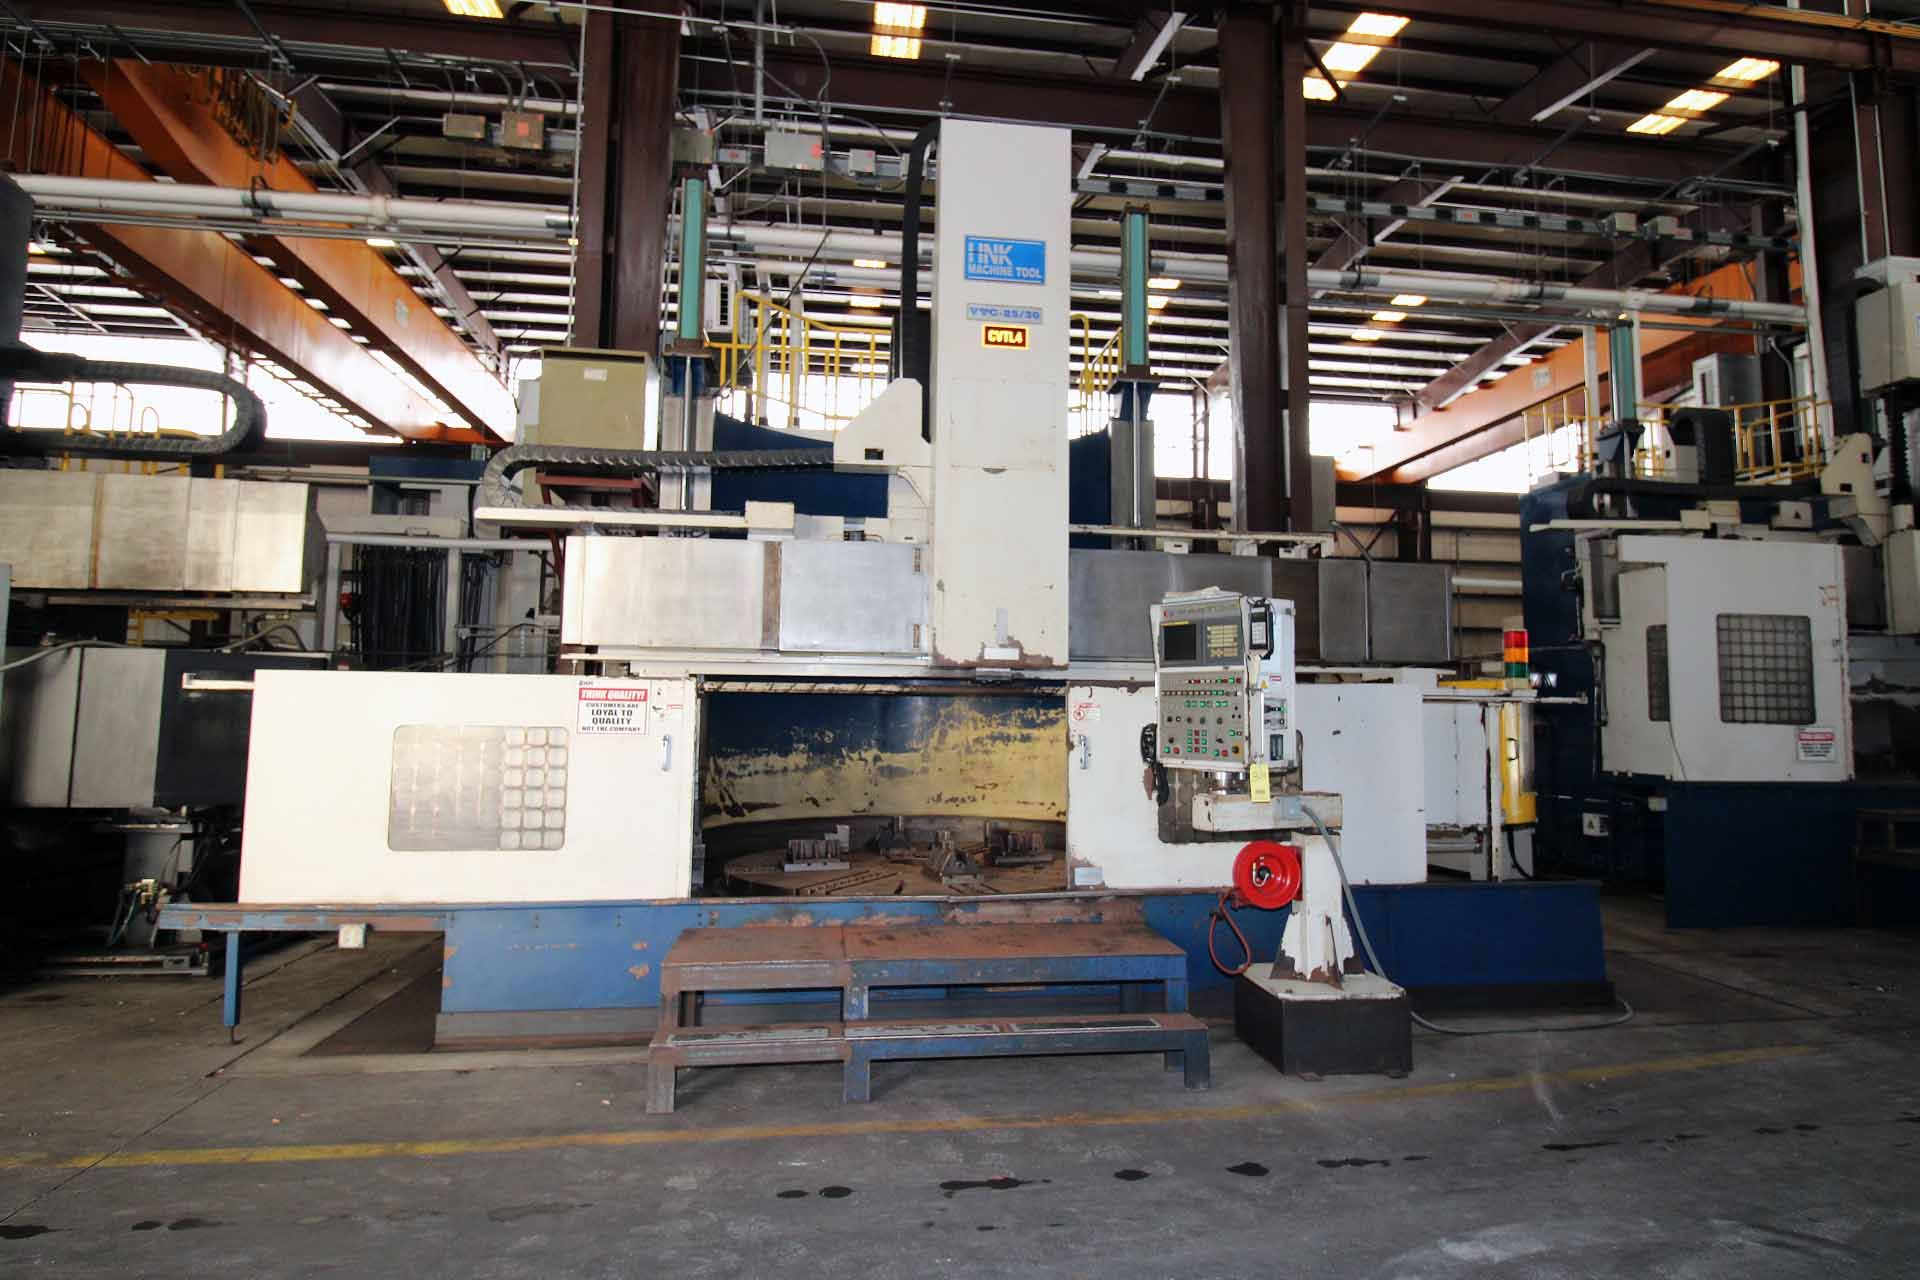 CNC VERTICAL TURNING CENTER, HNK MDL. VTC25/30, new 2009, Fanuc 18i-TB CNC control, 98.4” table